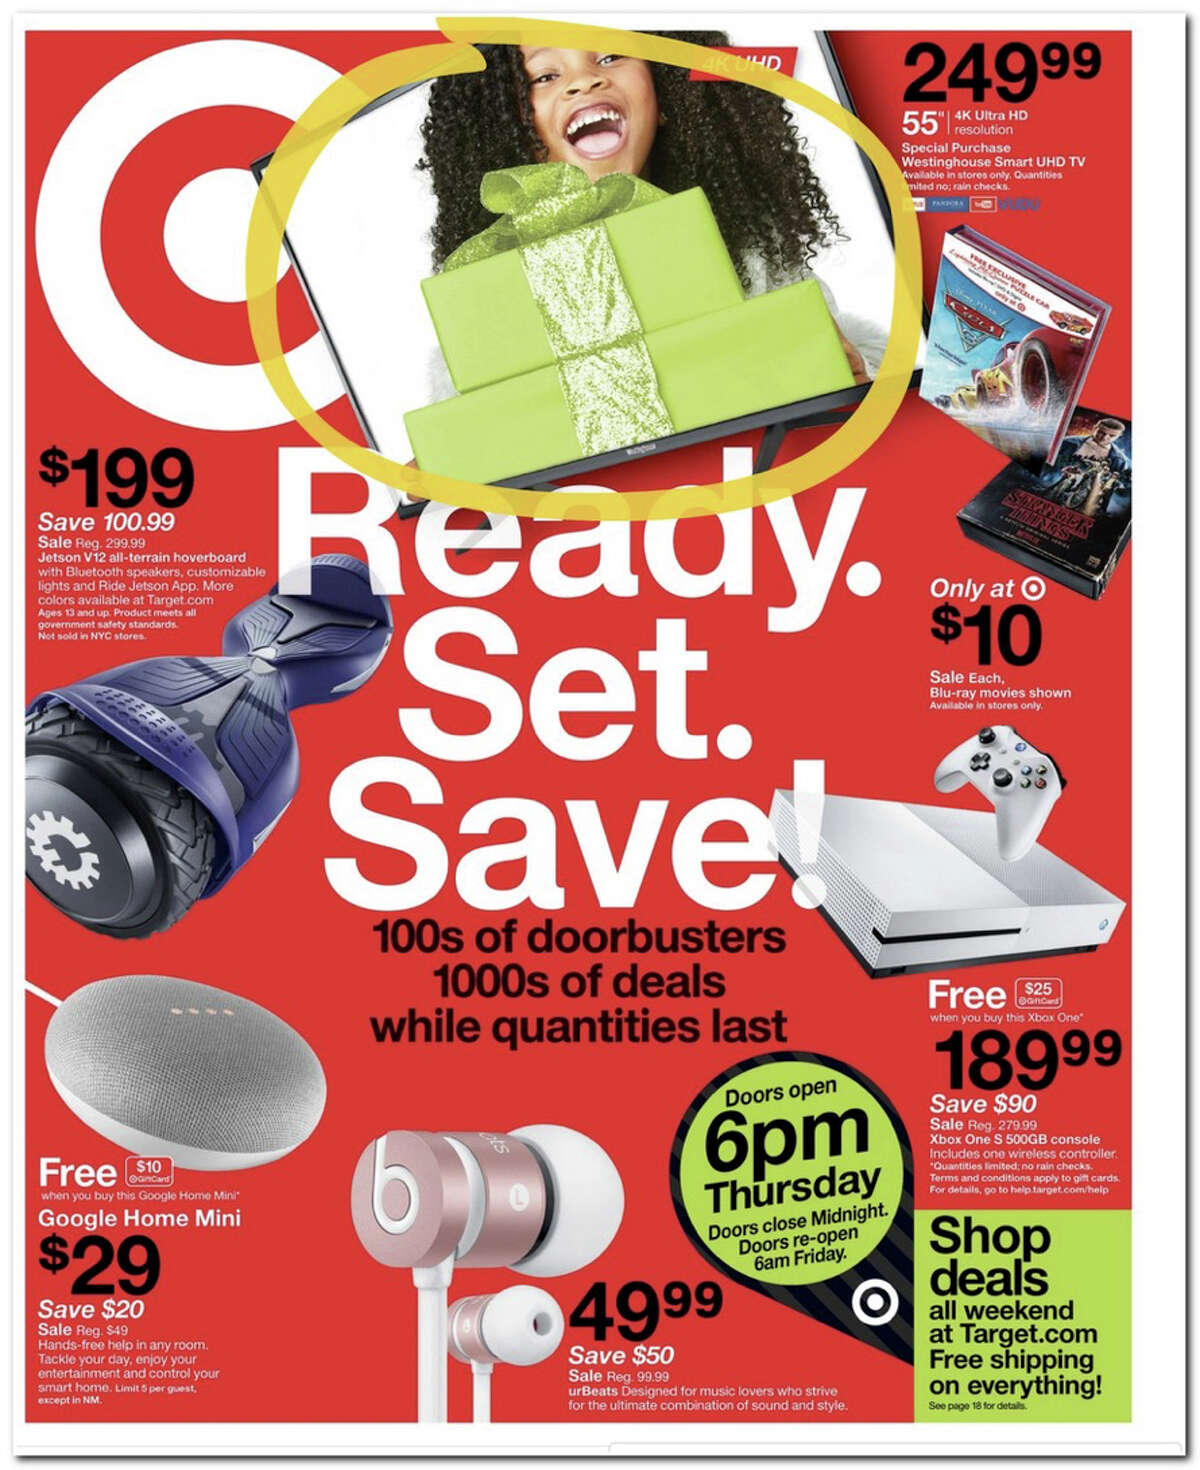 Target has released its 2017 Black Friday Doorbuster ad. Prices and promotion begin on Thursday, Nov. 23 at 6 p.m. and are subject to change based on availability and the retailer's determination.